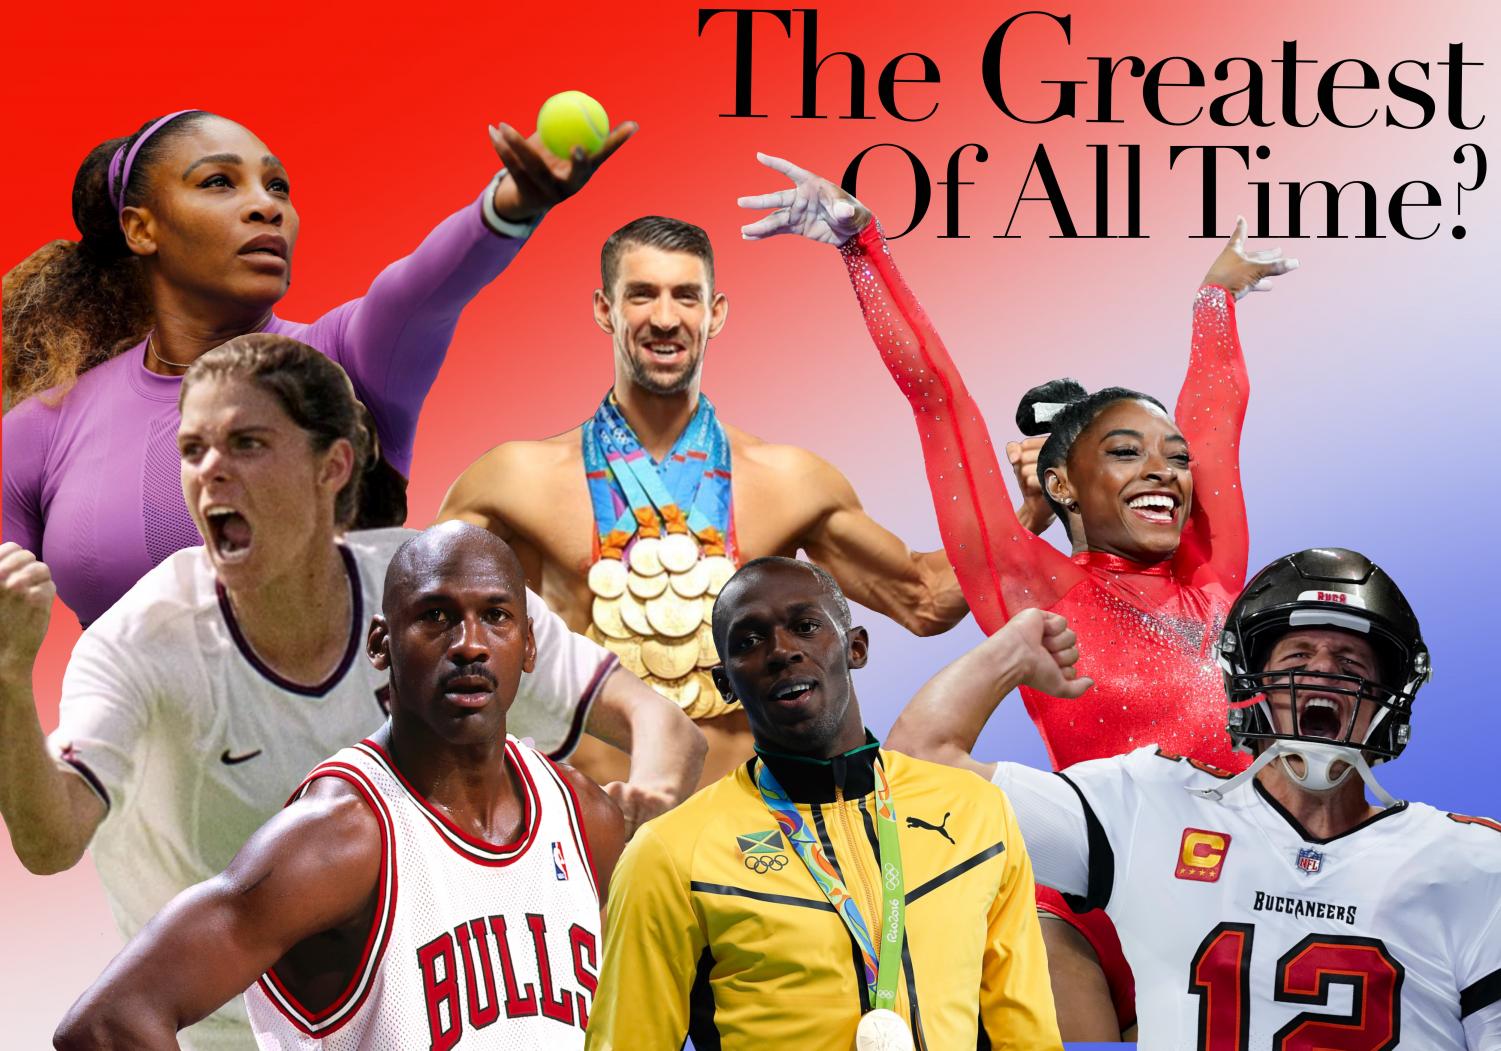 Dgn Omega The Absurdity Of The ‘worlds Greatest Athlete